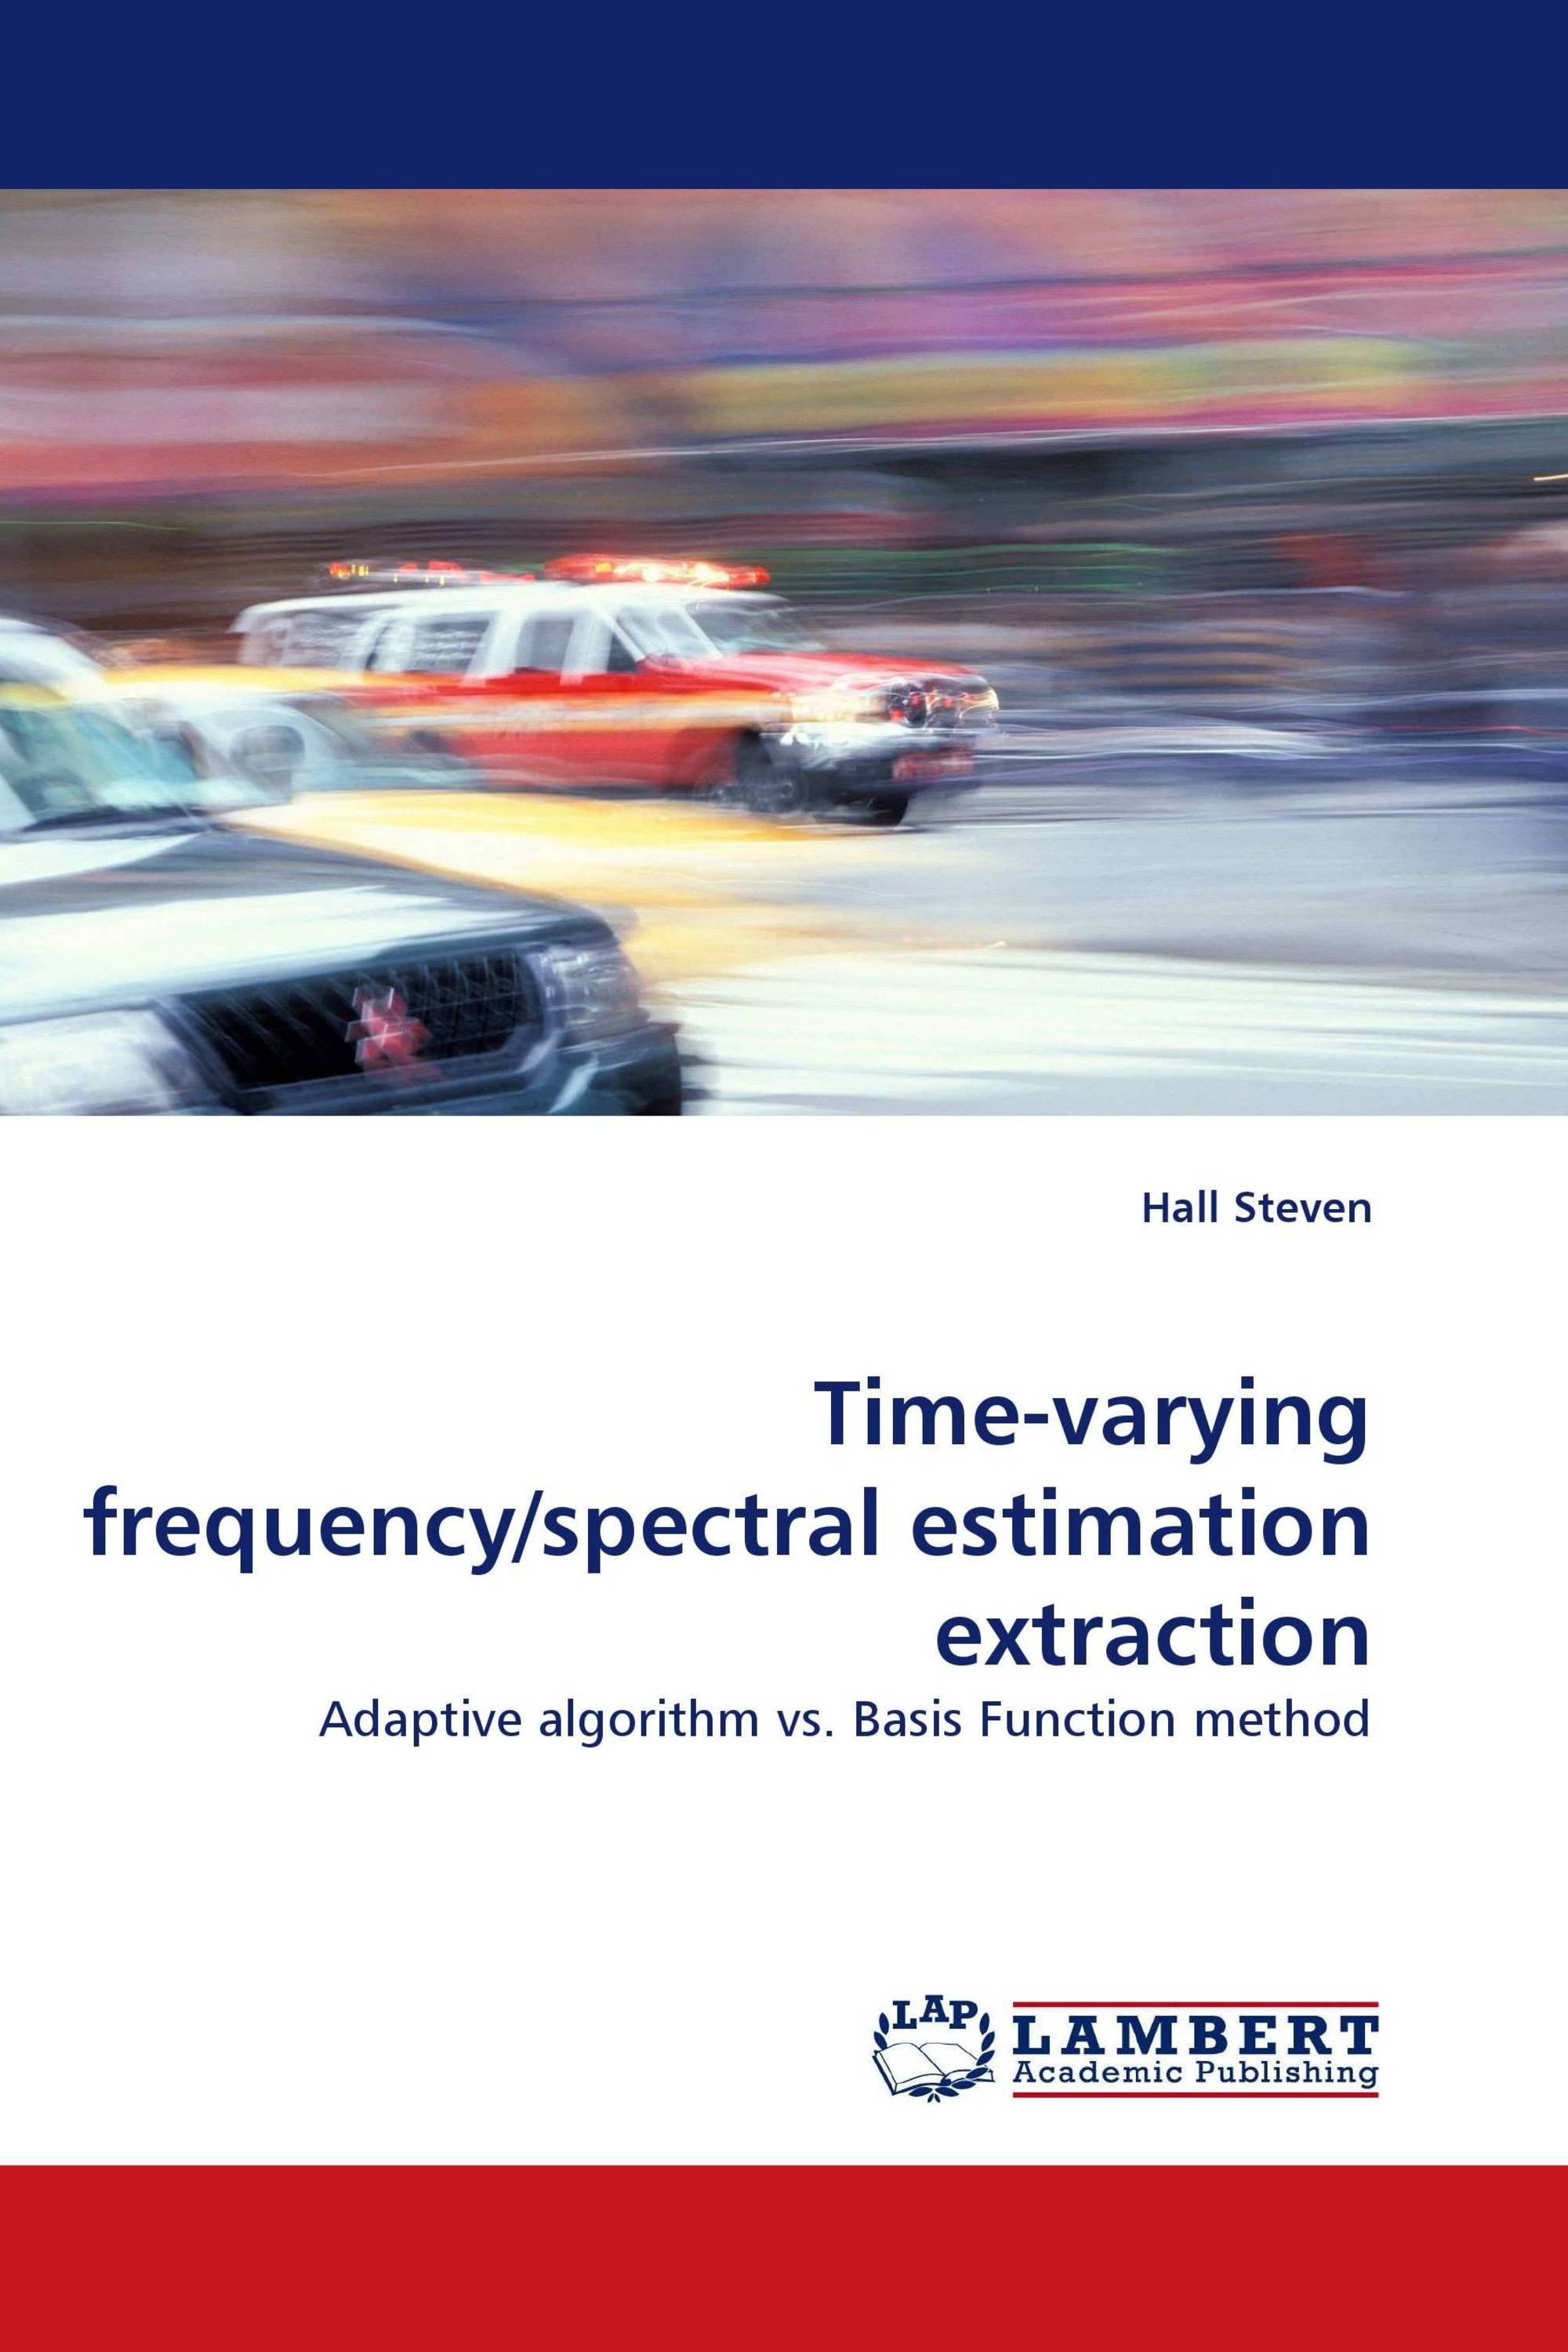 Time-varying frequency/spectral estimation extraction